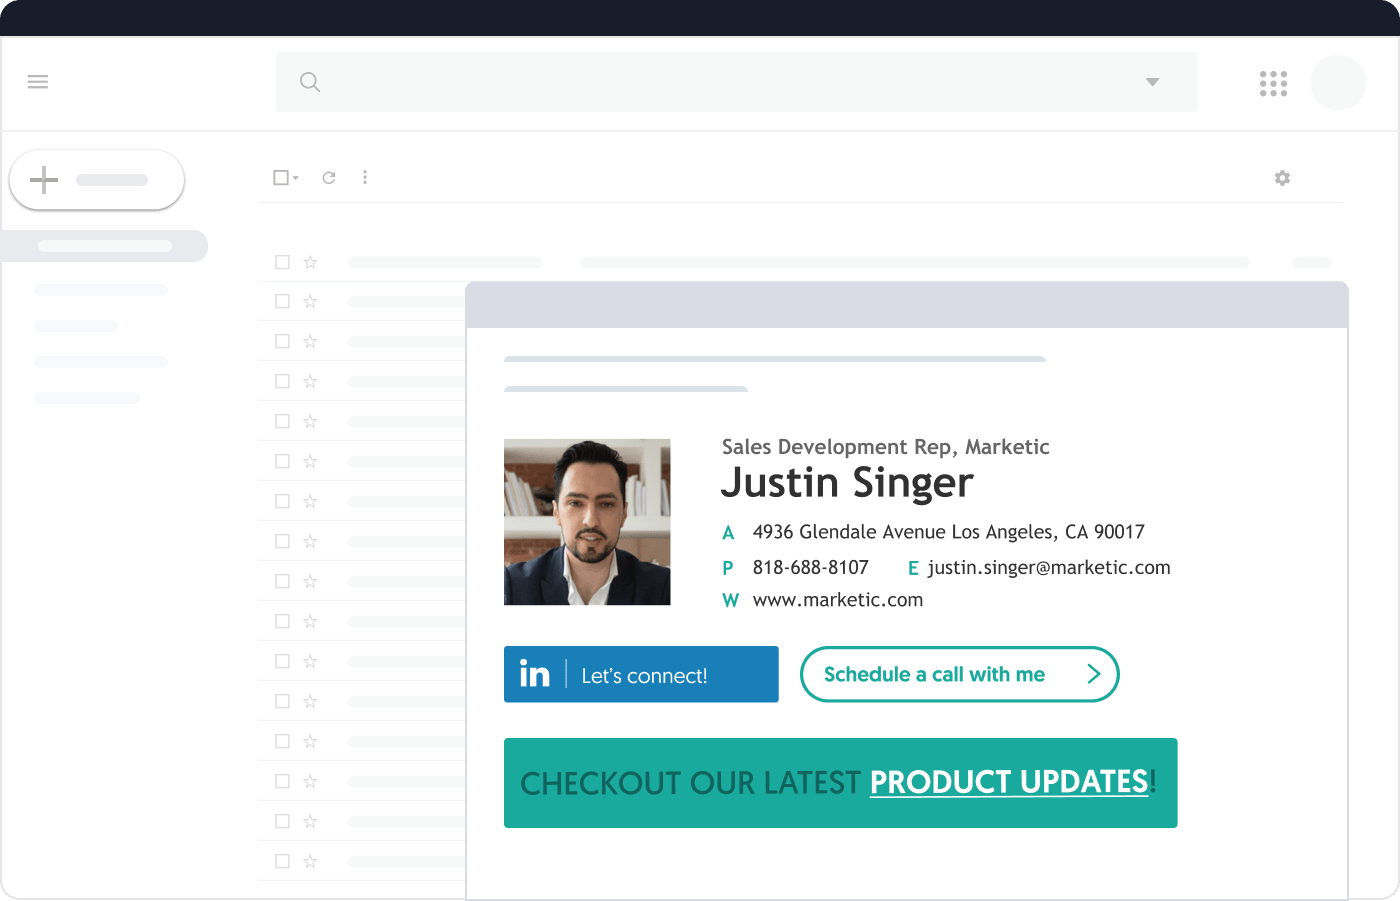 Global email signature manager for sales teams